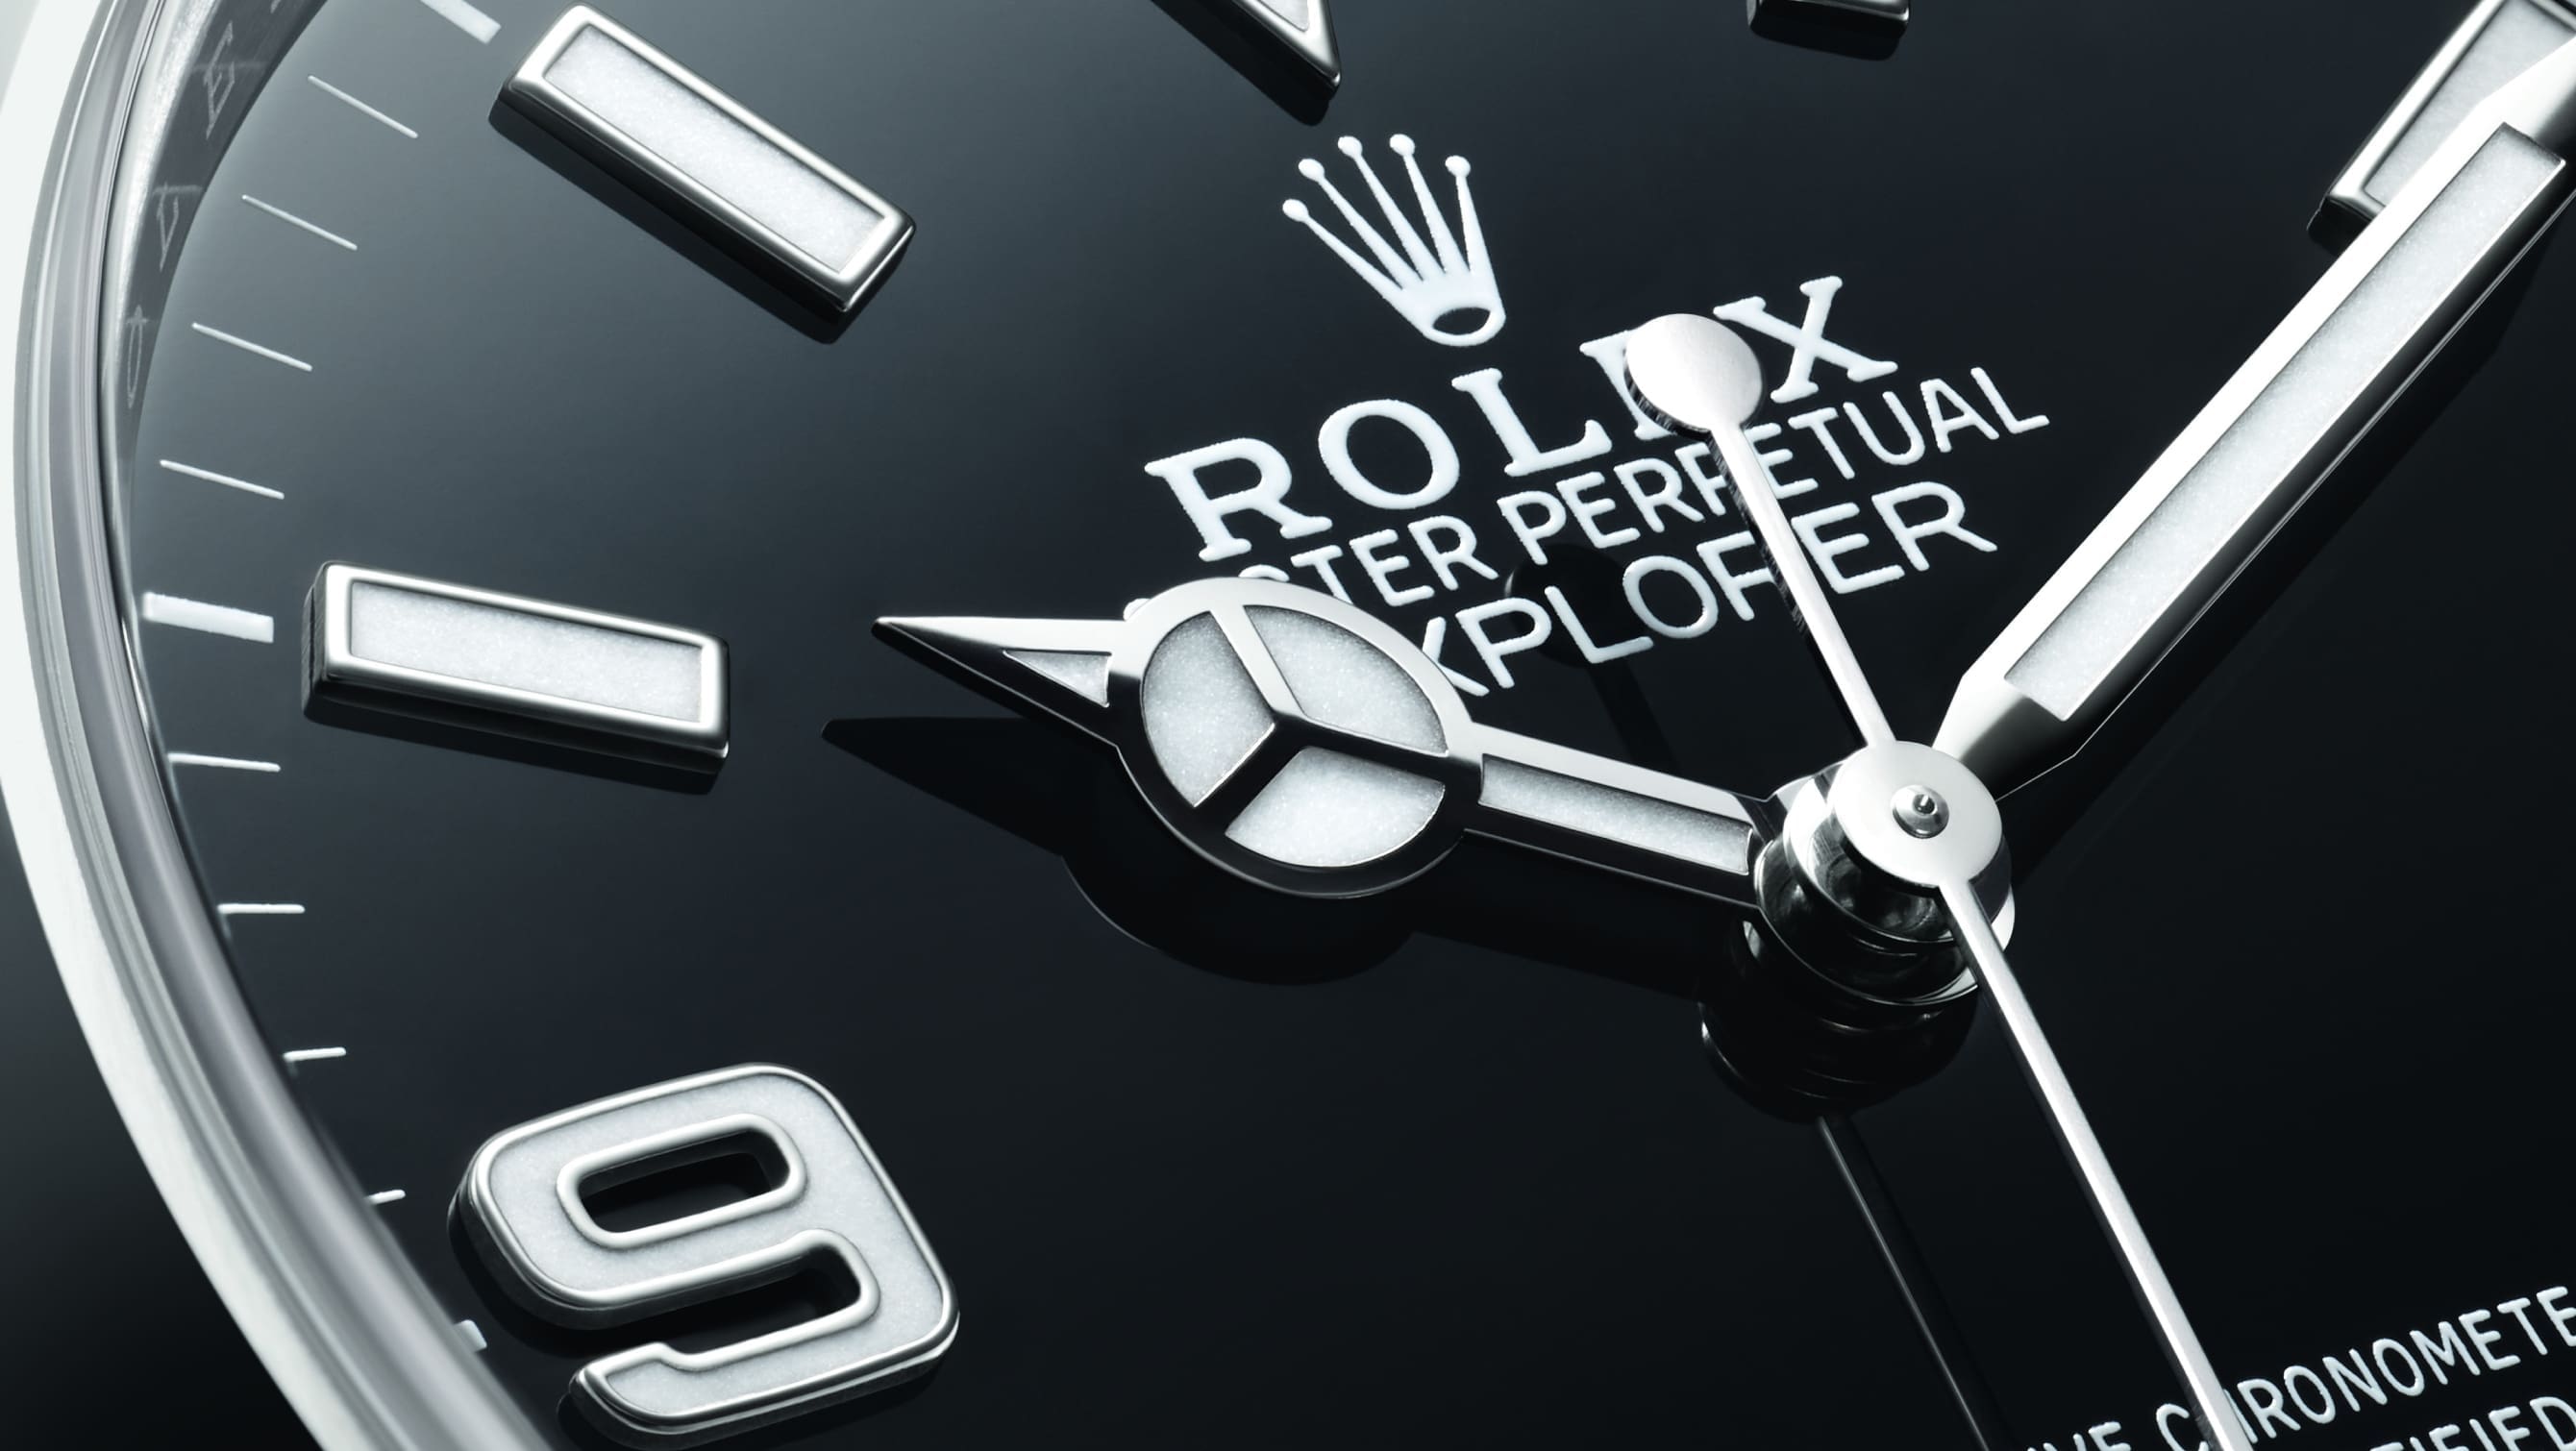 What’s the story behind Rolex’s iconic “Mercedes” hands?